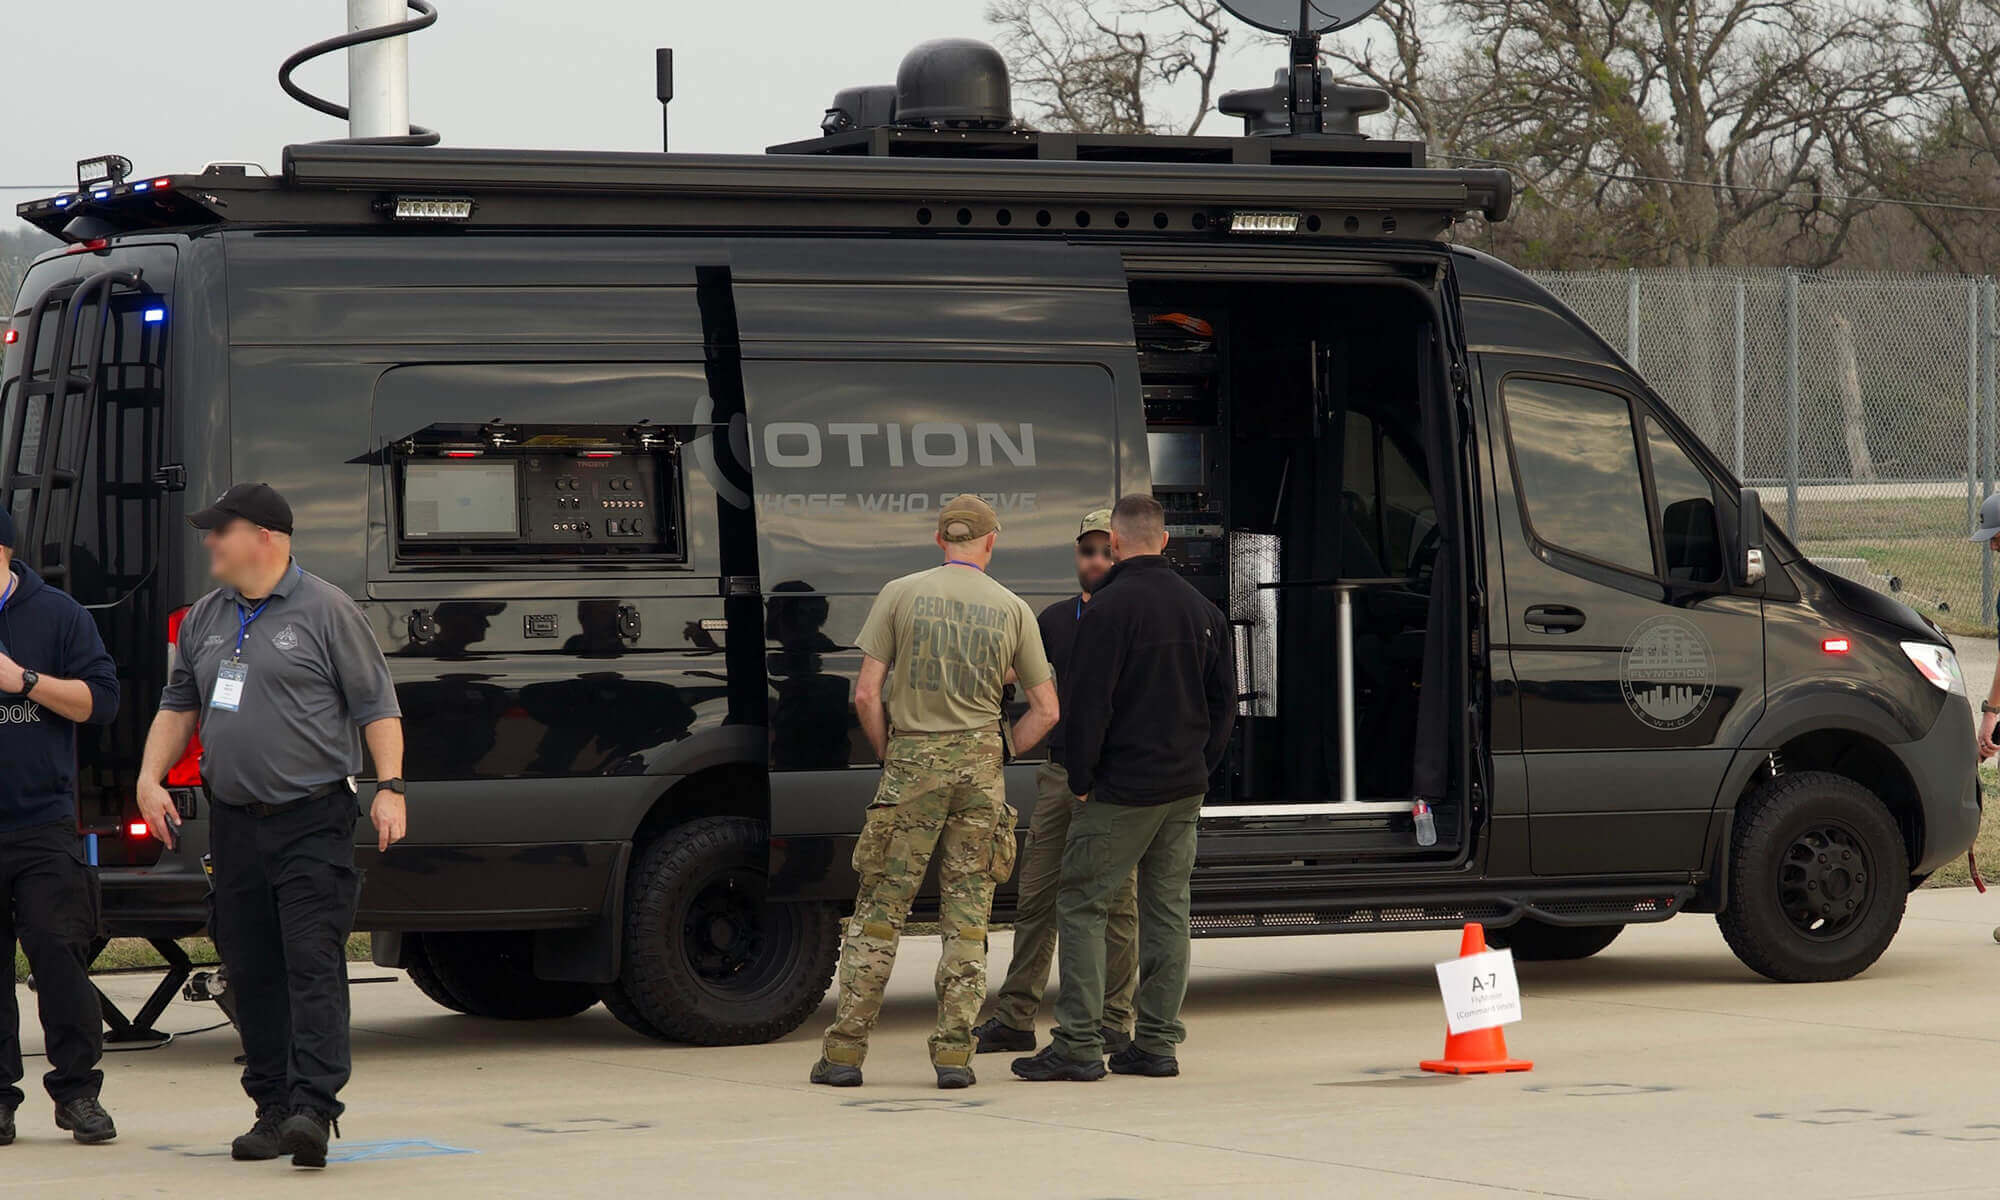 Mobile Command Vans - Fly Motion and Drone Capable